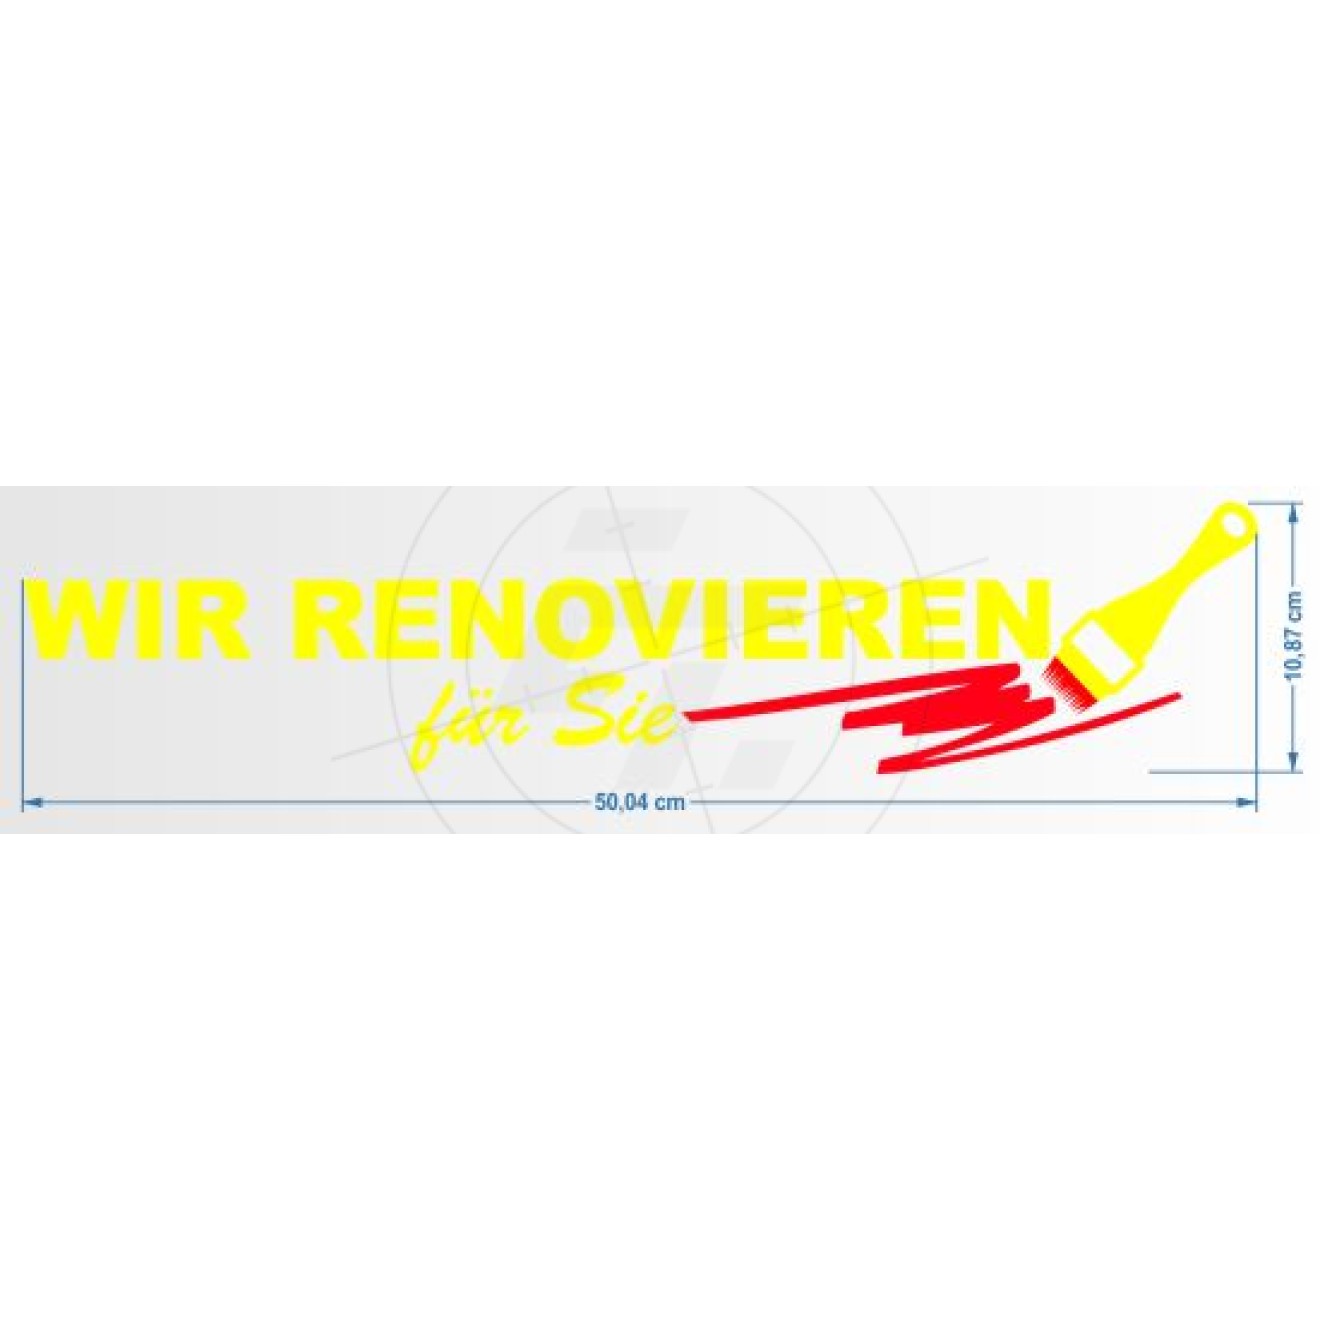 We renovate for you, Text sticker with brush